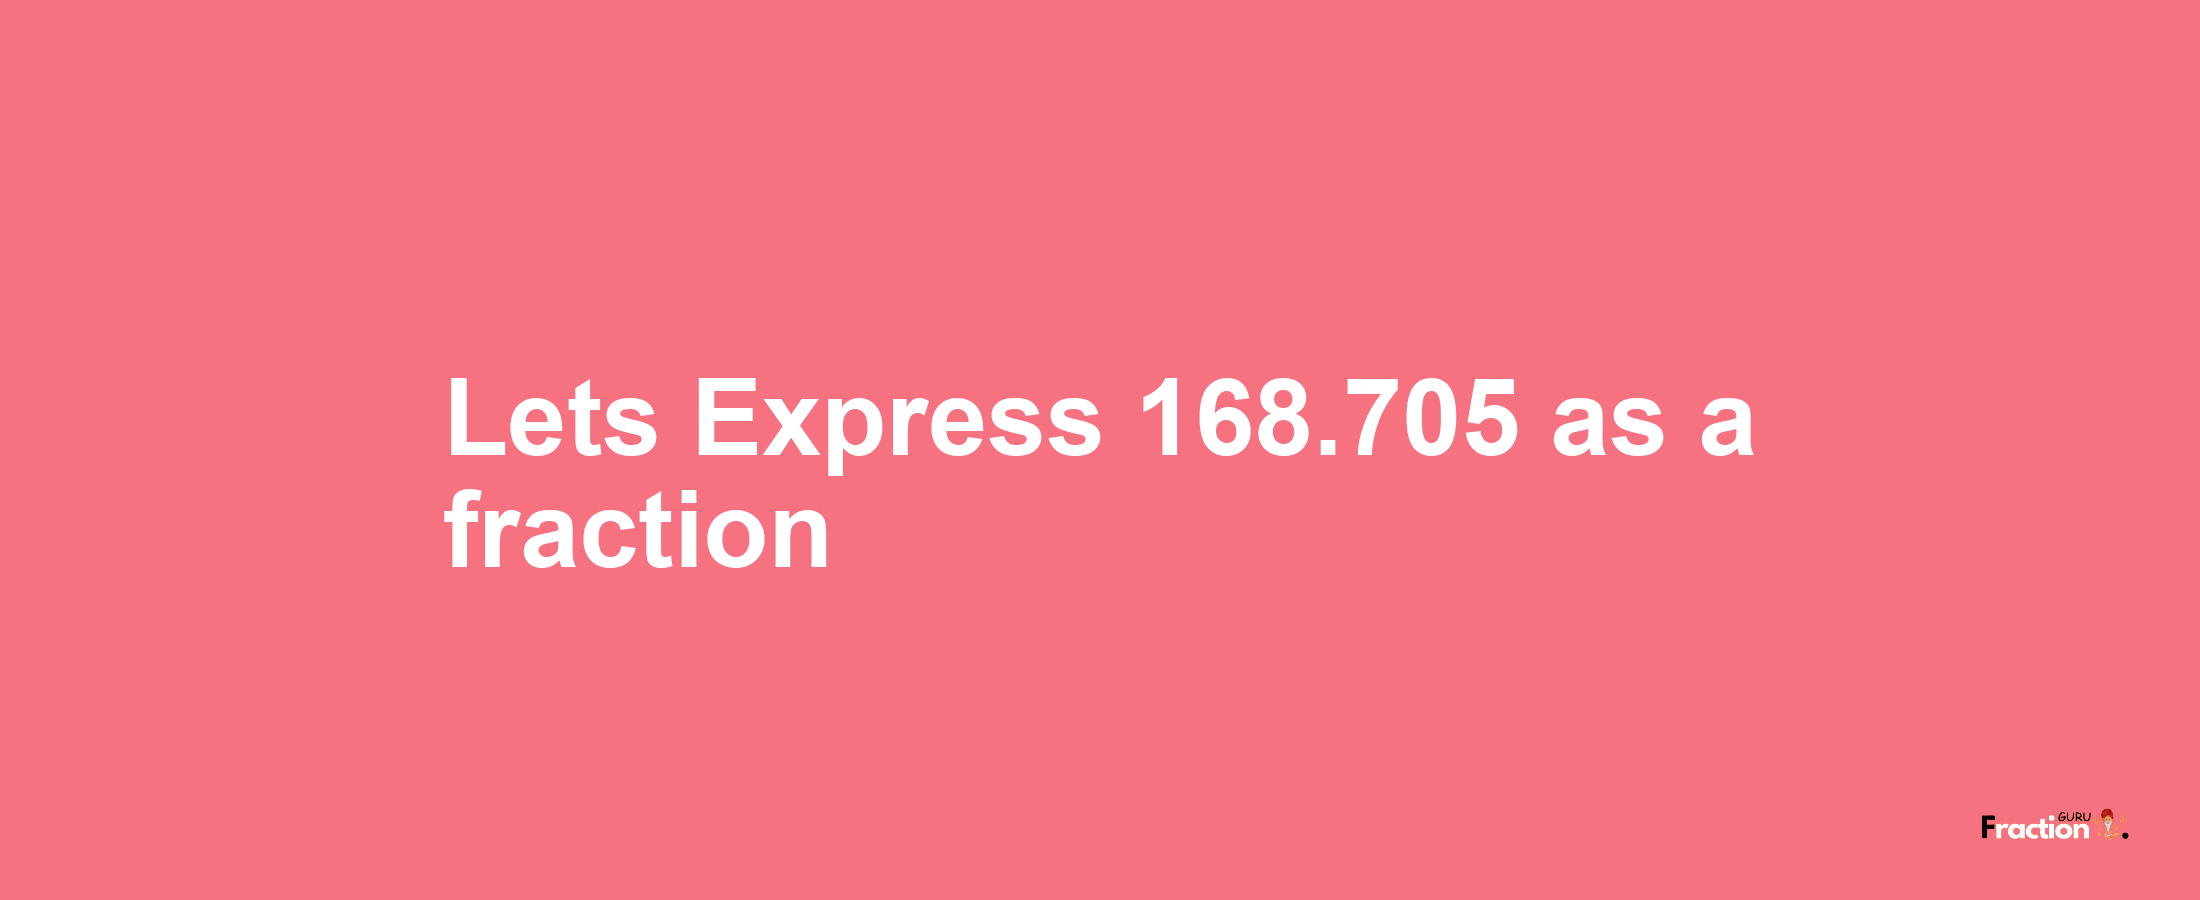 Lets Express 168.705 as afraction